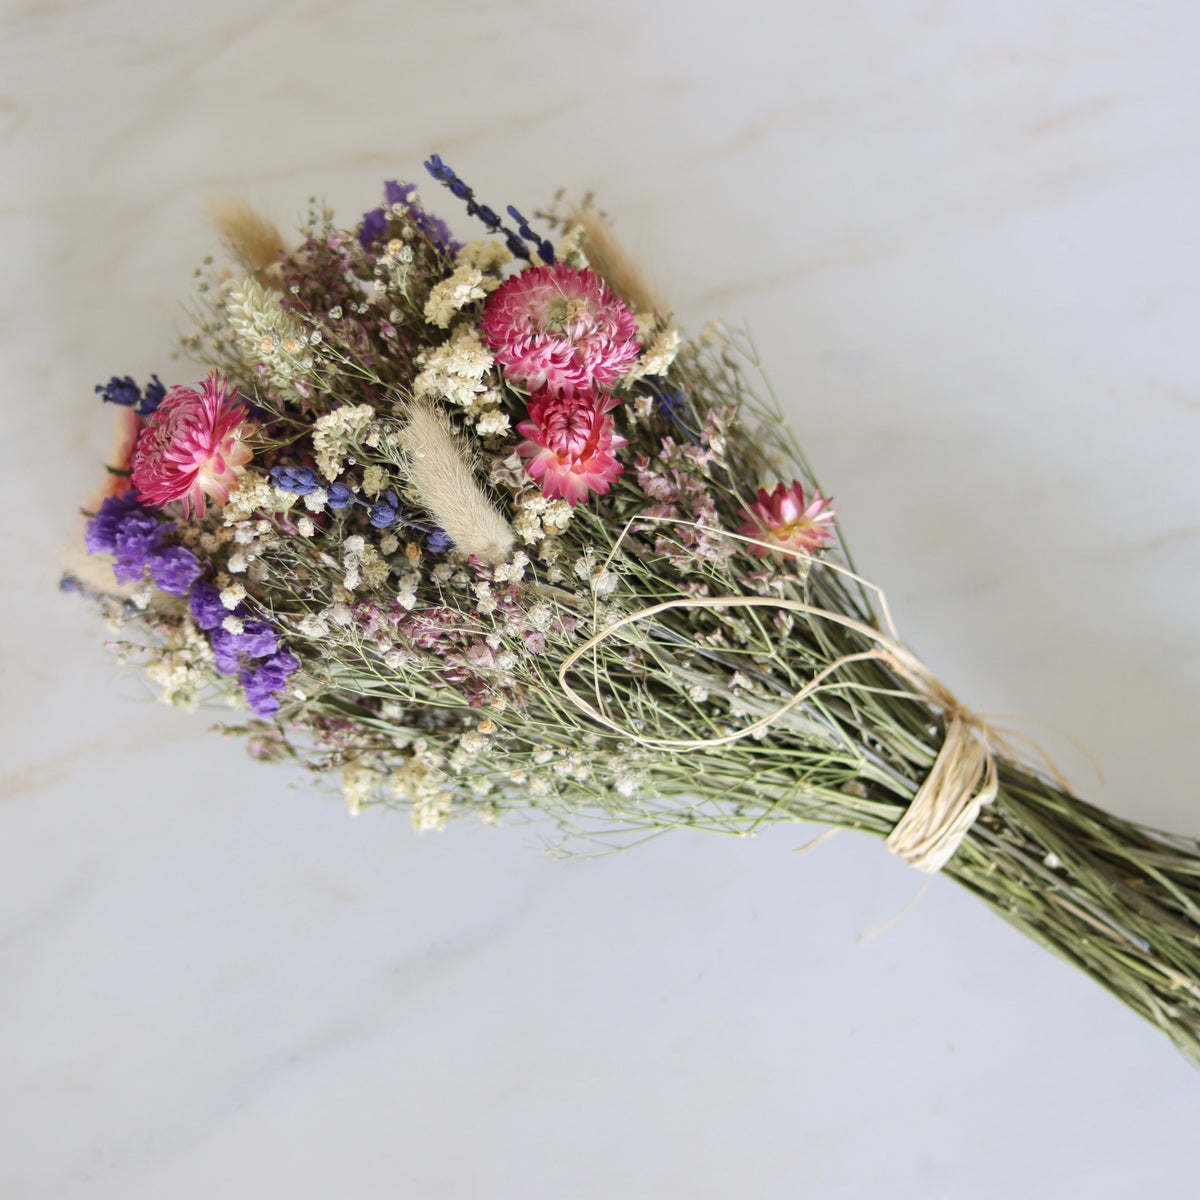 Dried flower bouquet “Rainbow Spring” - flowers as decoration and gift - Holistic Habitat 